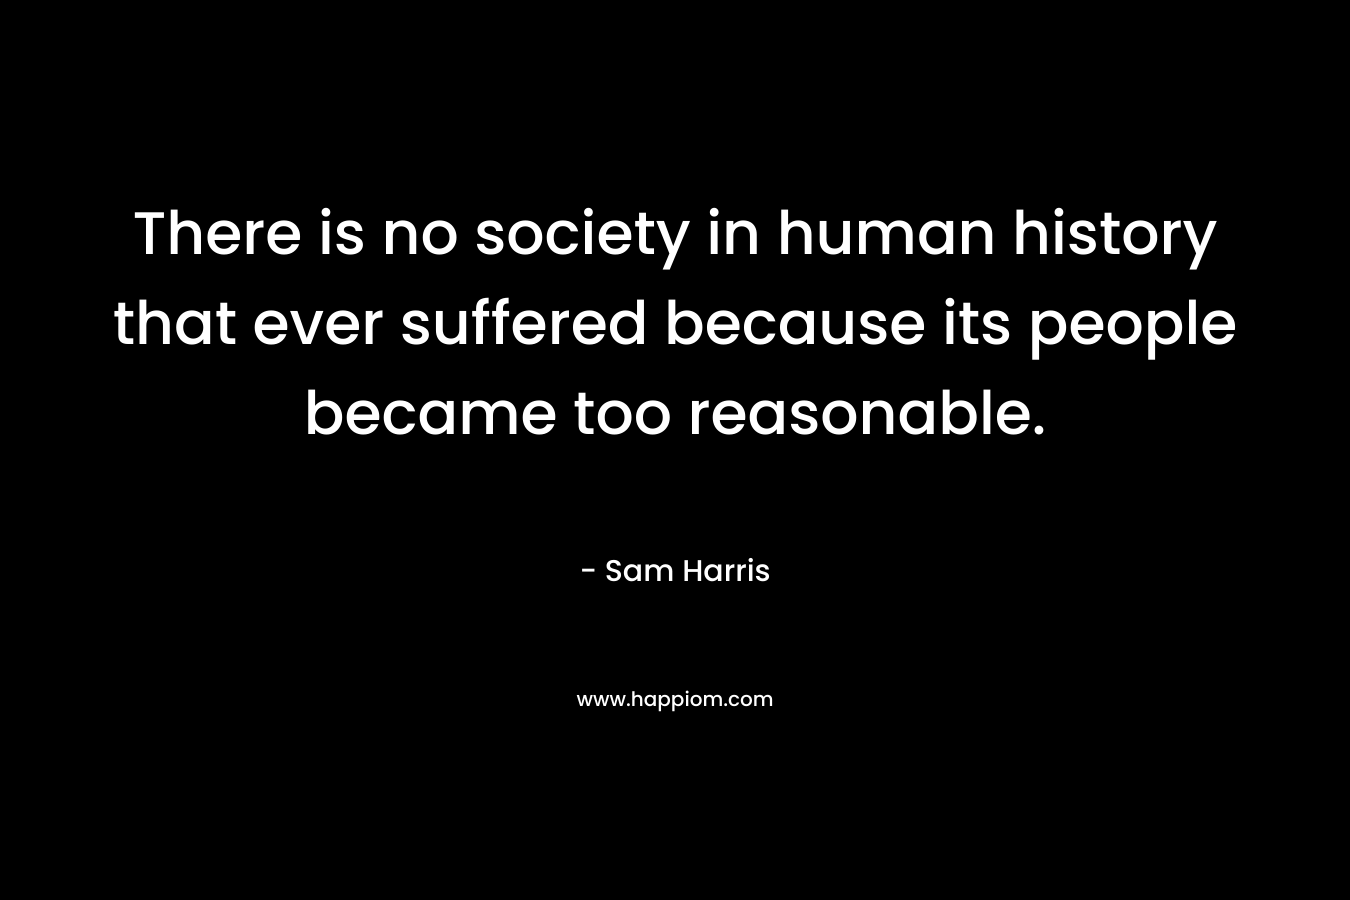 There is no society in human history that ever suffered because its people became too reasonable. – Sam Harris